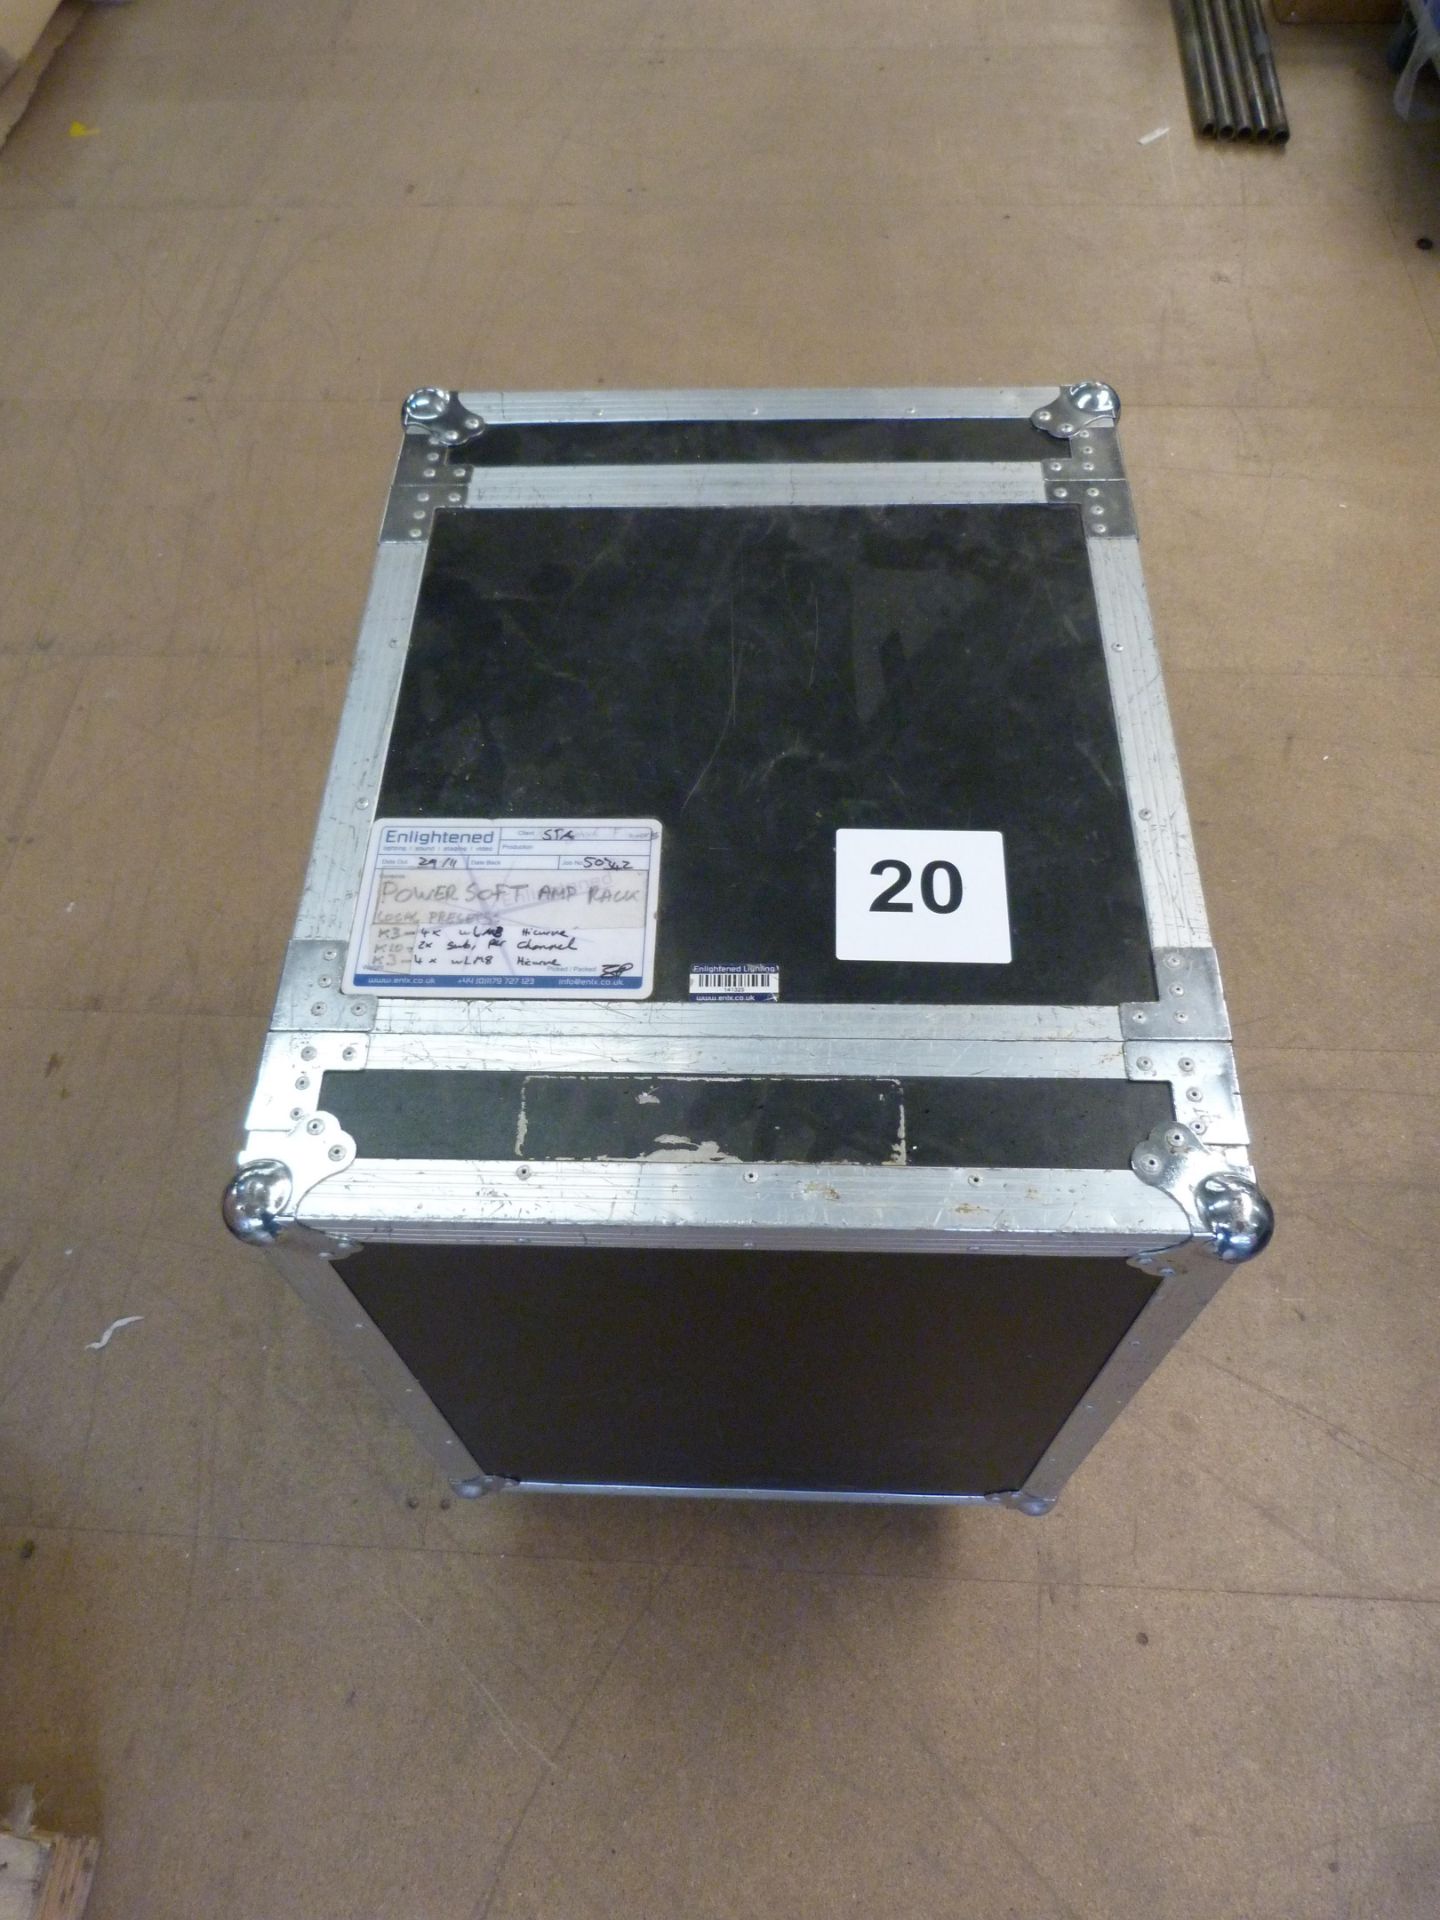 Powersoft Amp Rack. Included within Lot 10. If sum of Lots 11-20 is more than Lot 10, will be sold - Image 16 of 17